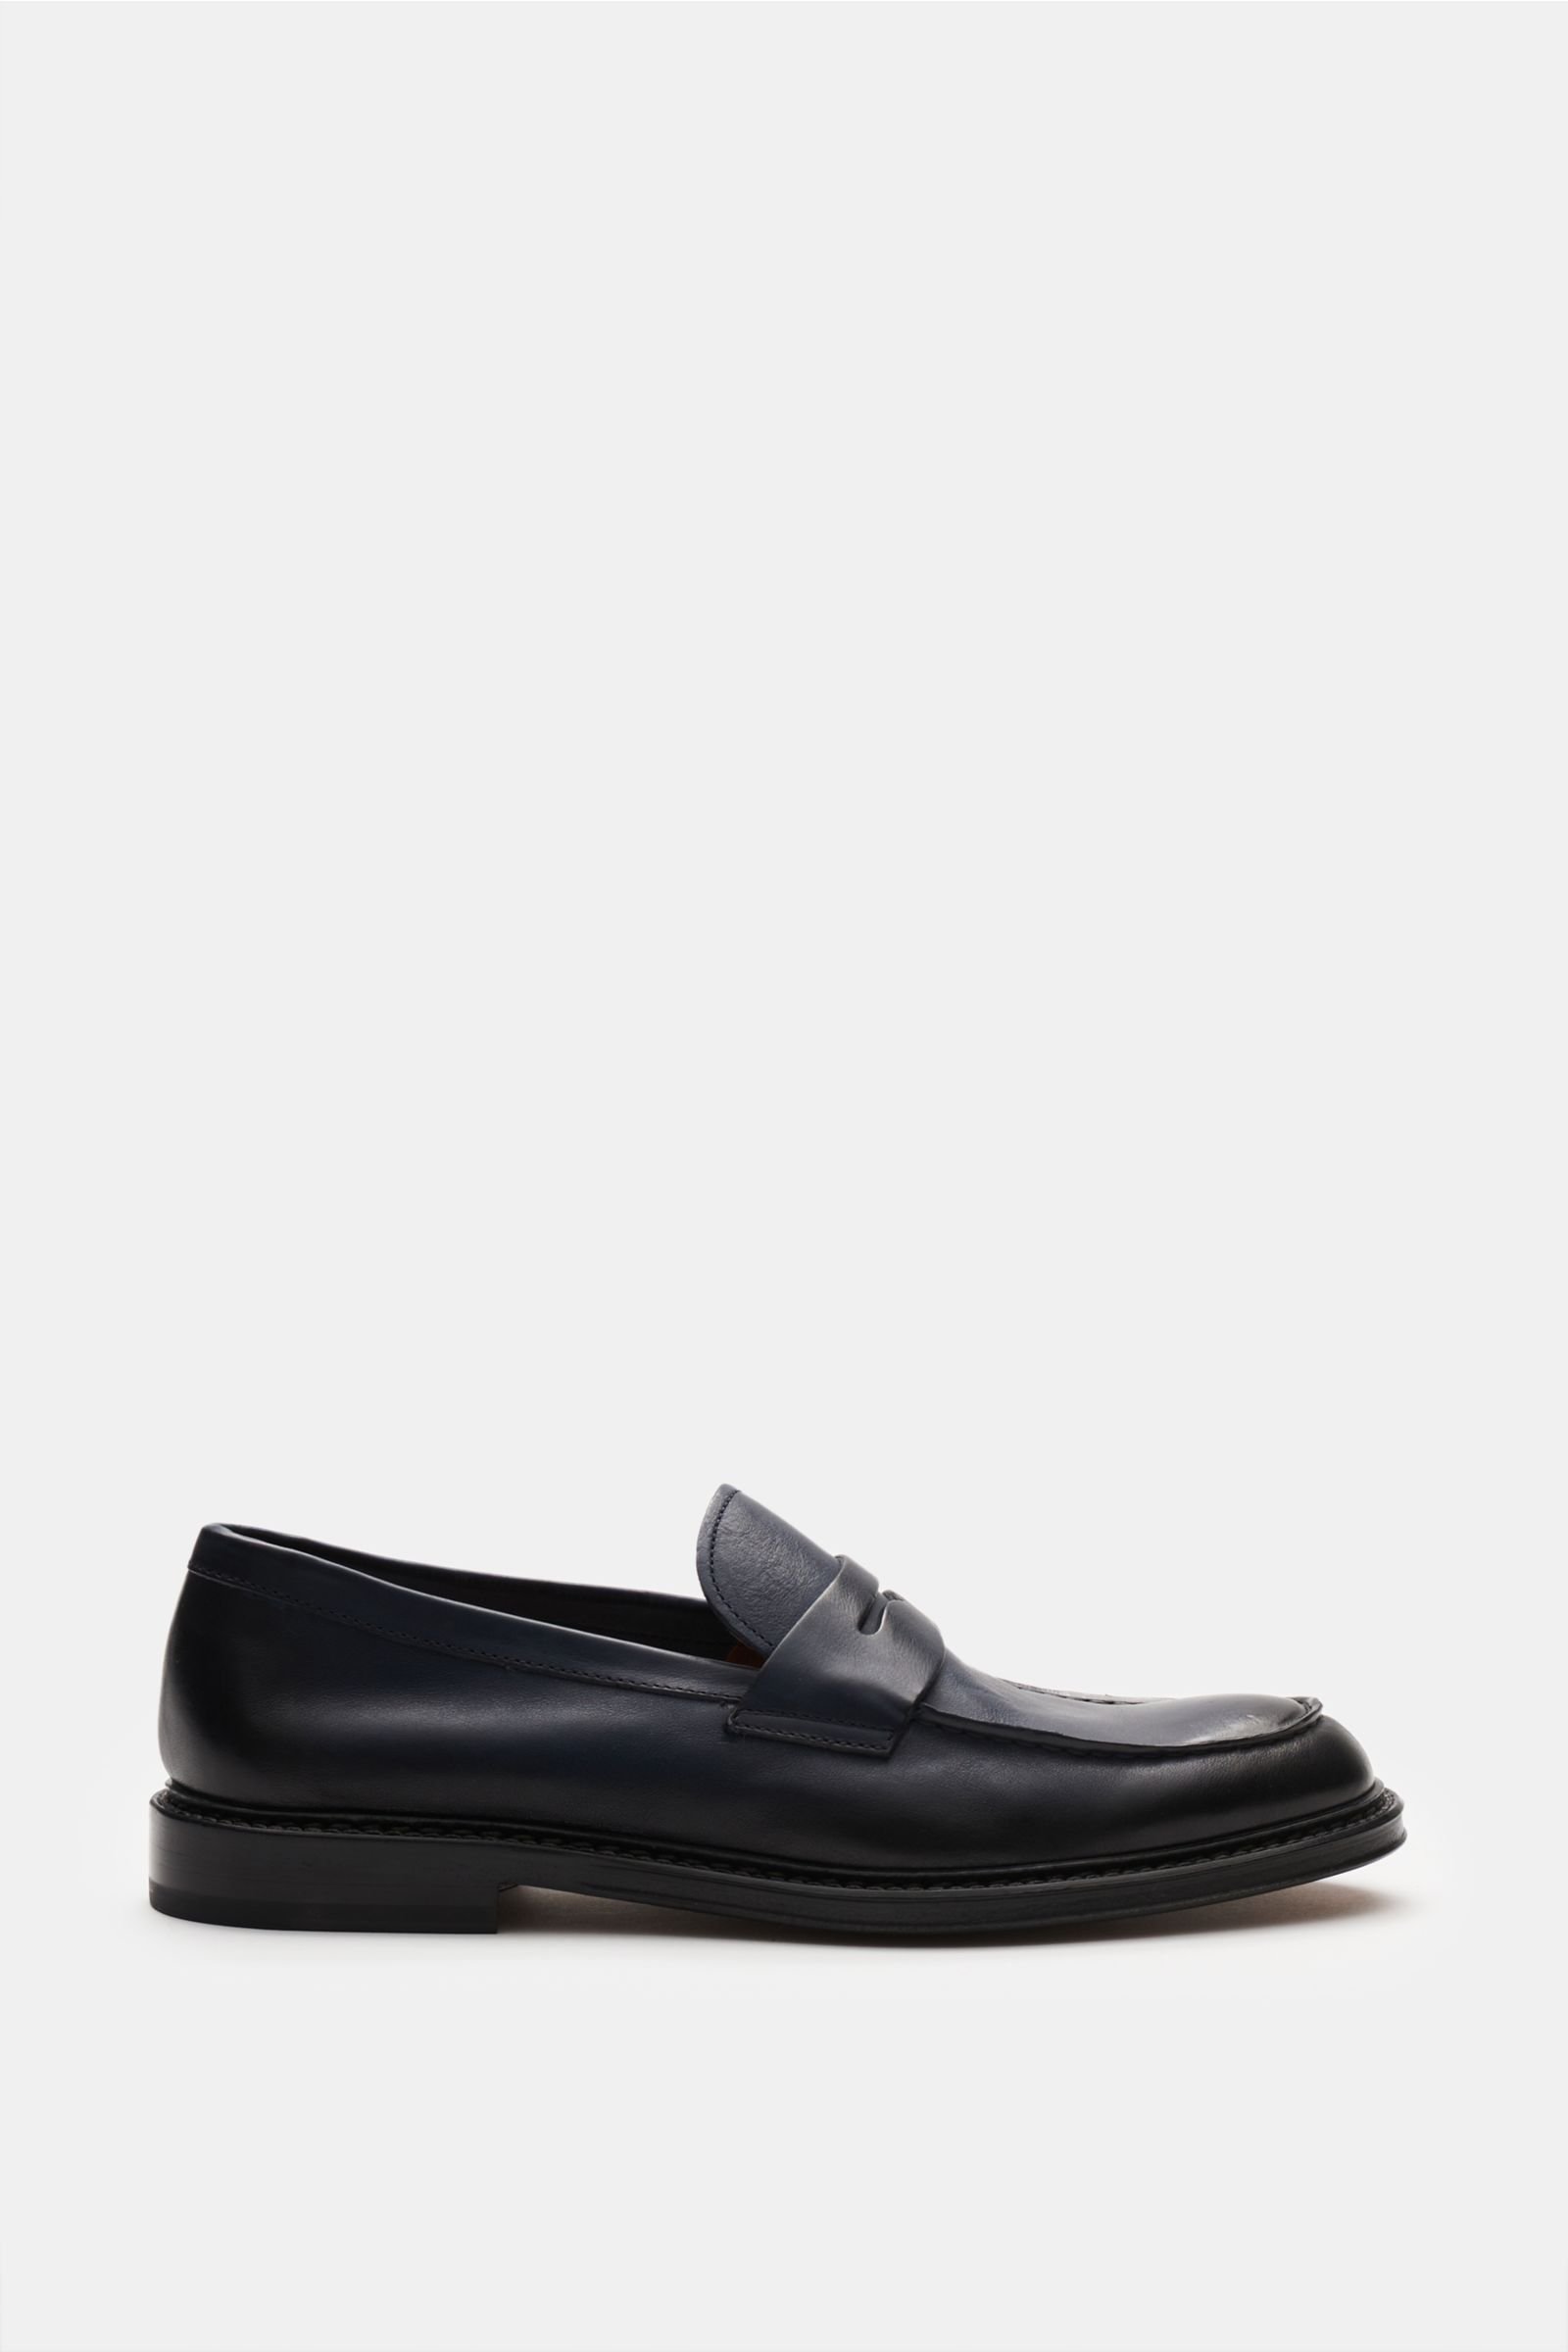 Penny loafers navy